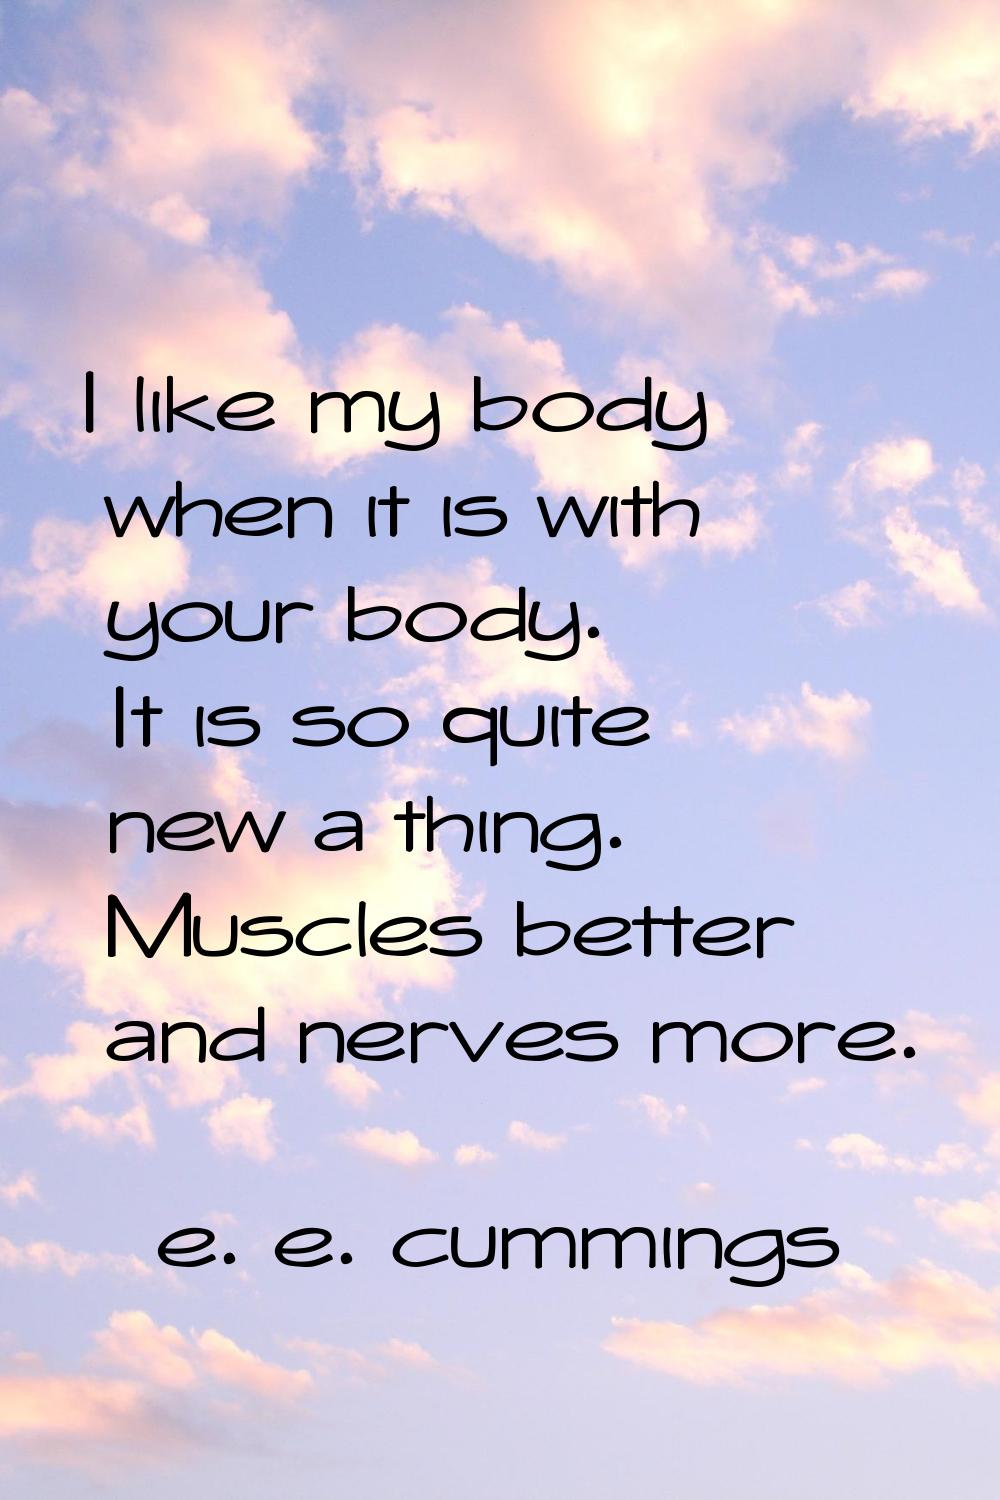 I like my body when it is with your body. It is so quite new a thing. Muscles better and nerves mor